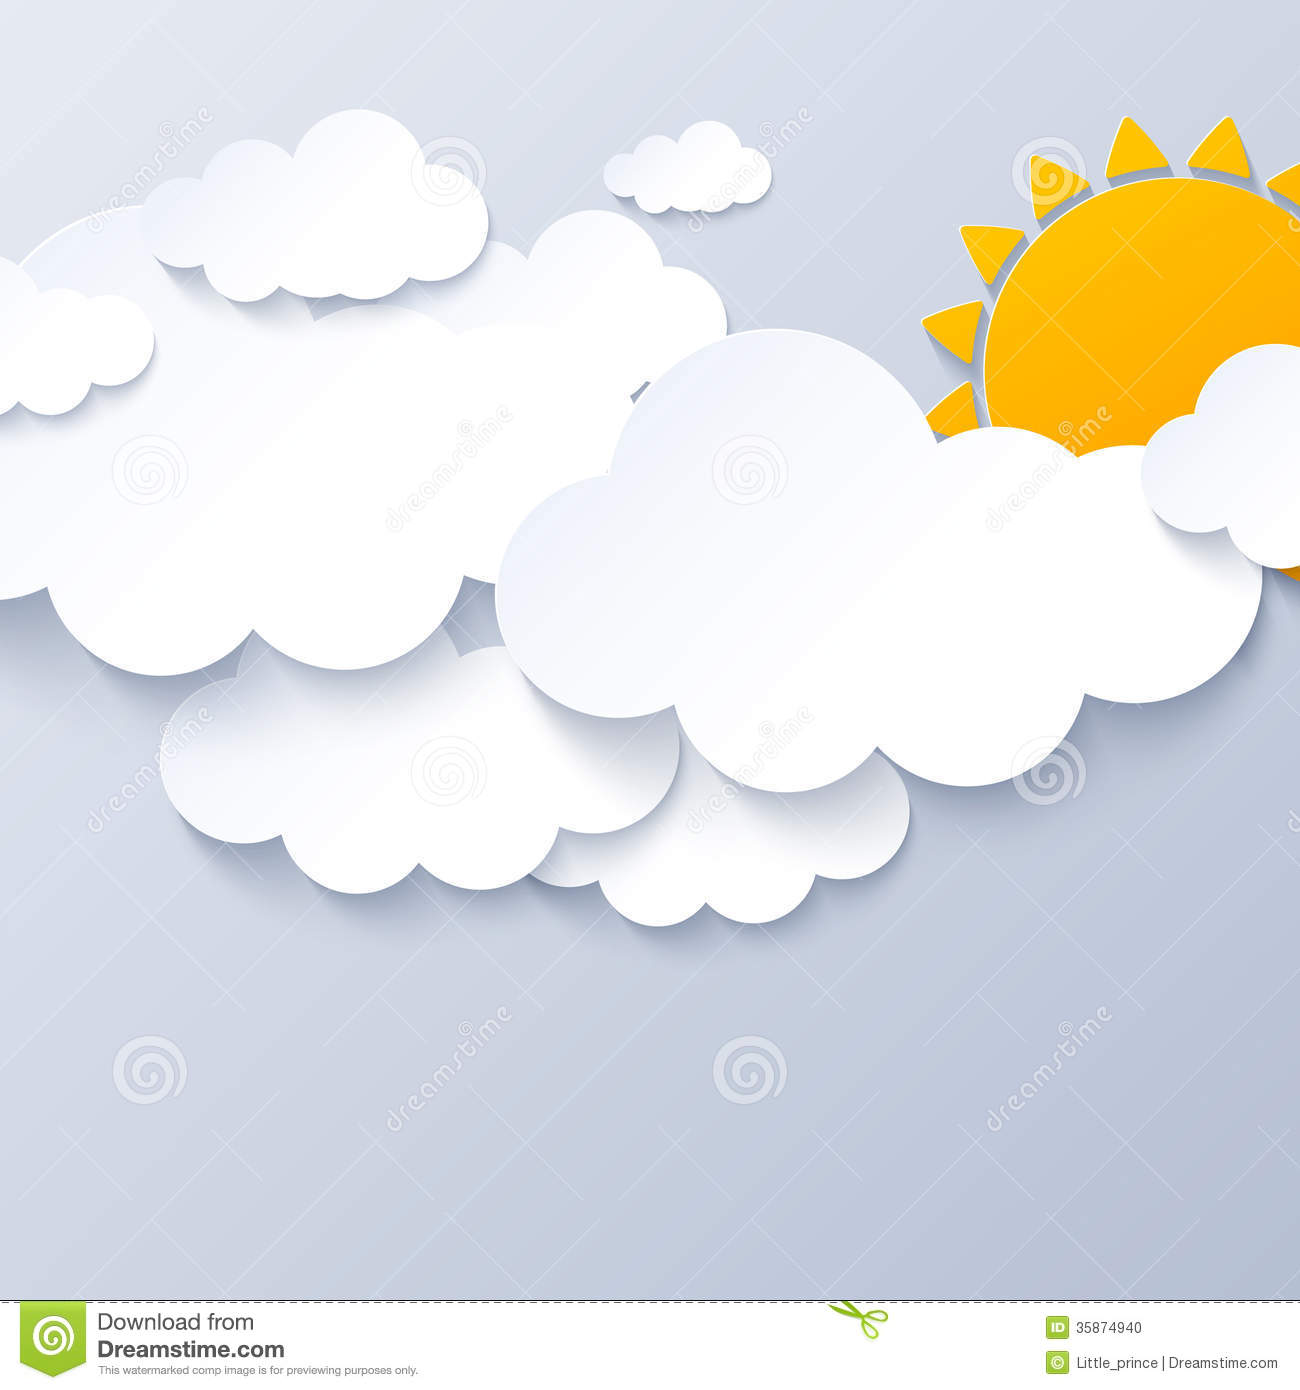 For Sun Cloud Clipart Displaying 15 Images For Sun Cloud Clipart